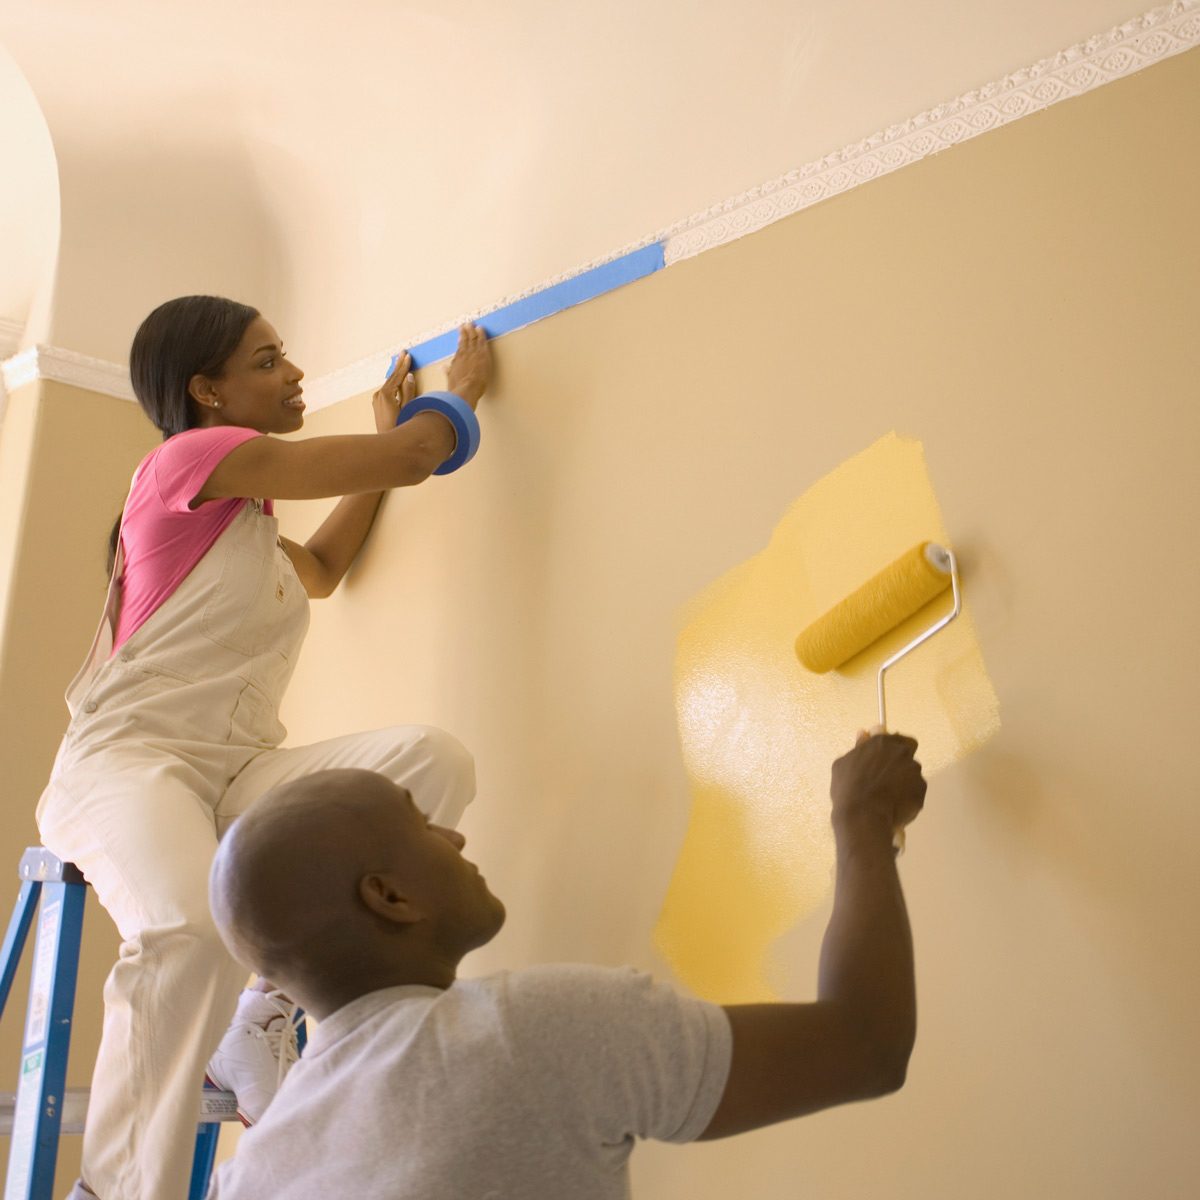 Couple Painting Wall Gettyimages A0034 000149b